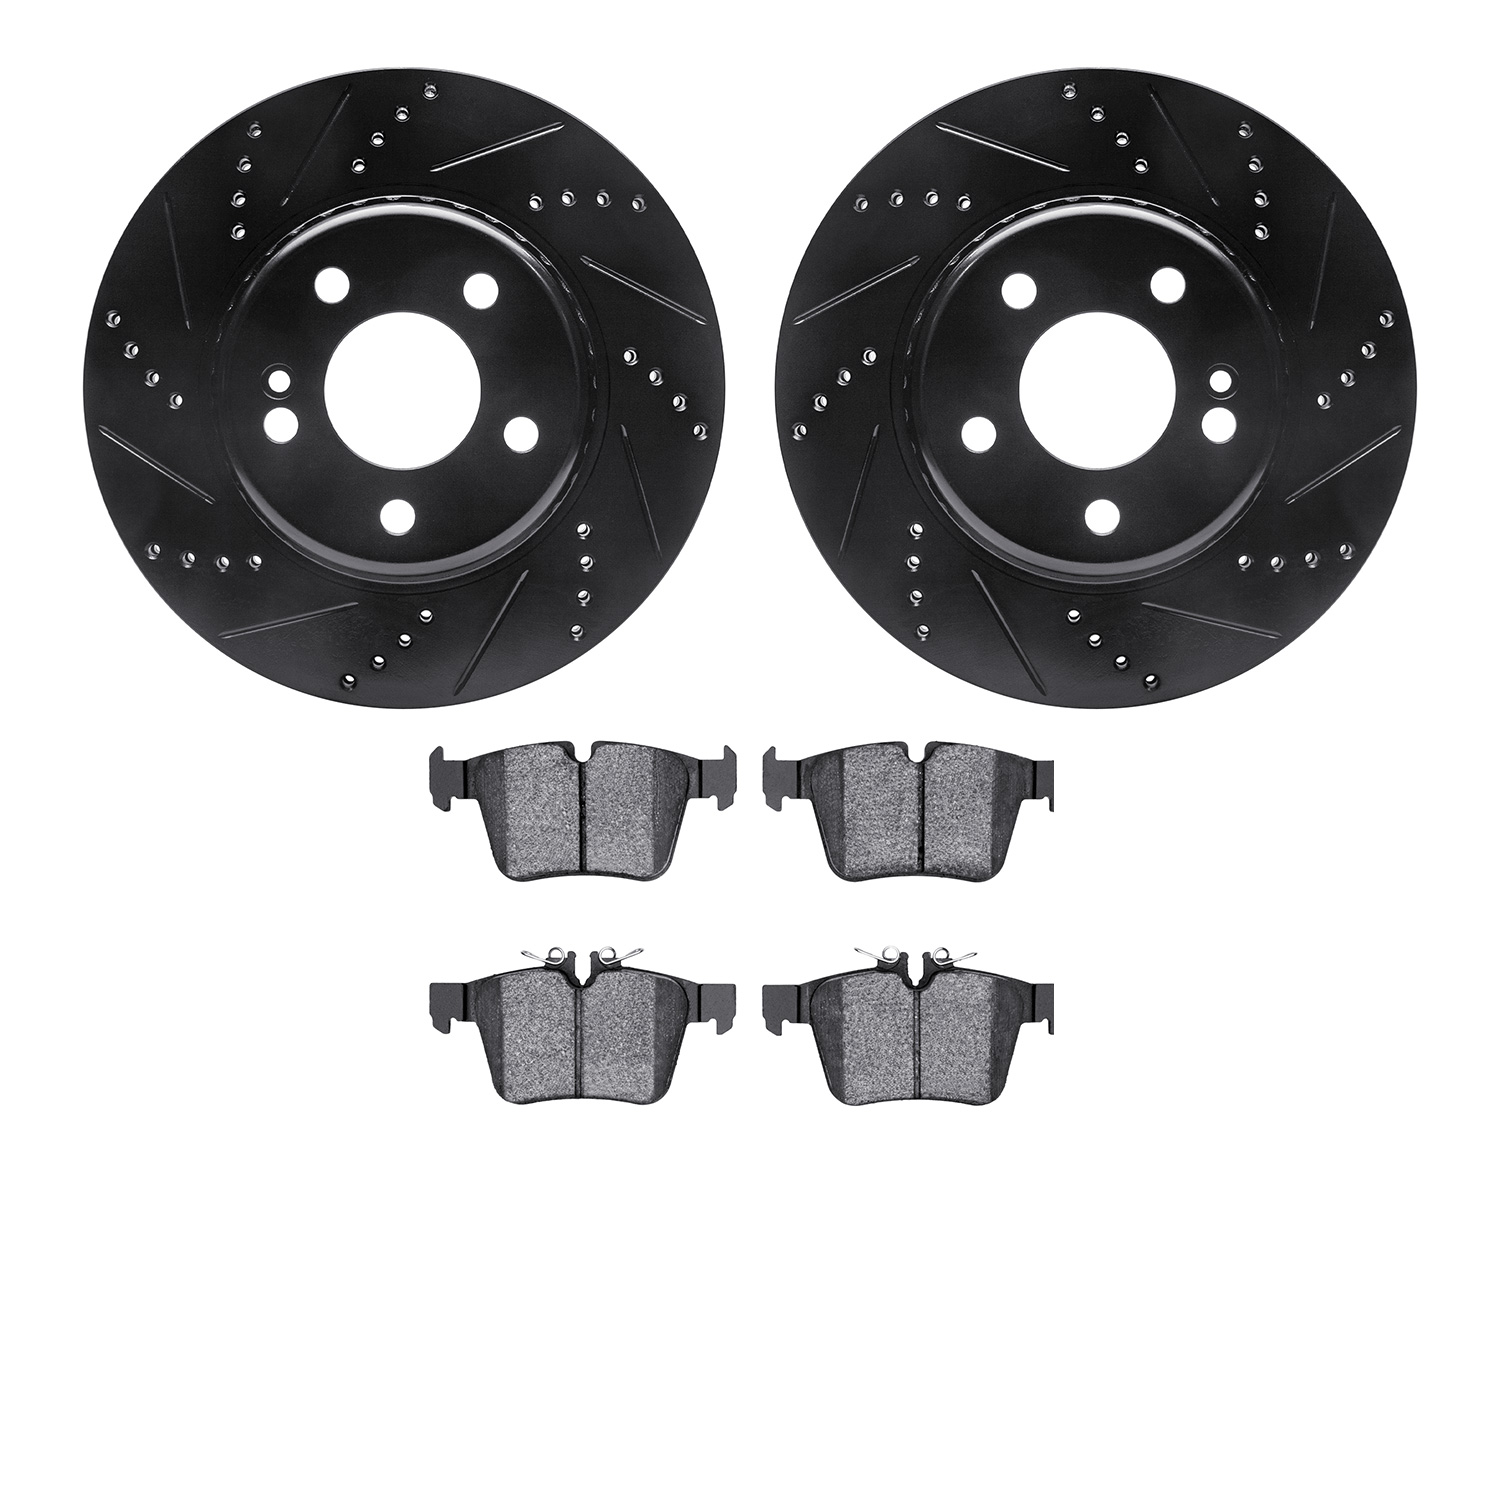 8302-63141 Drilled/Slotted Brake Rotors with 3000-Series Ceramic Brake Pads Kit [Black], Fits Select Mercedes-Benz, Position: Re